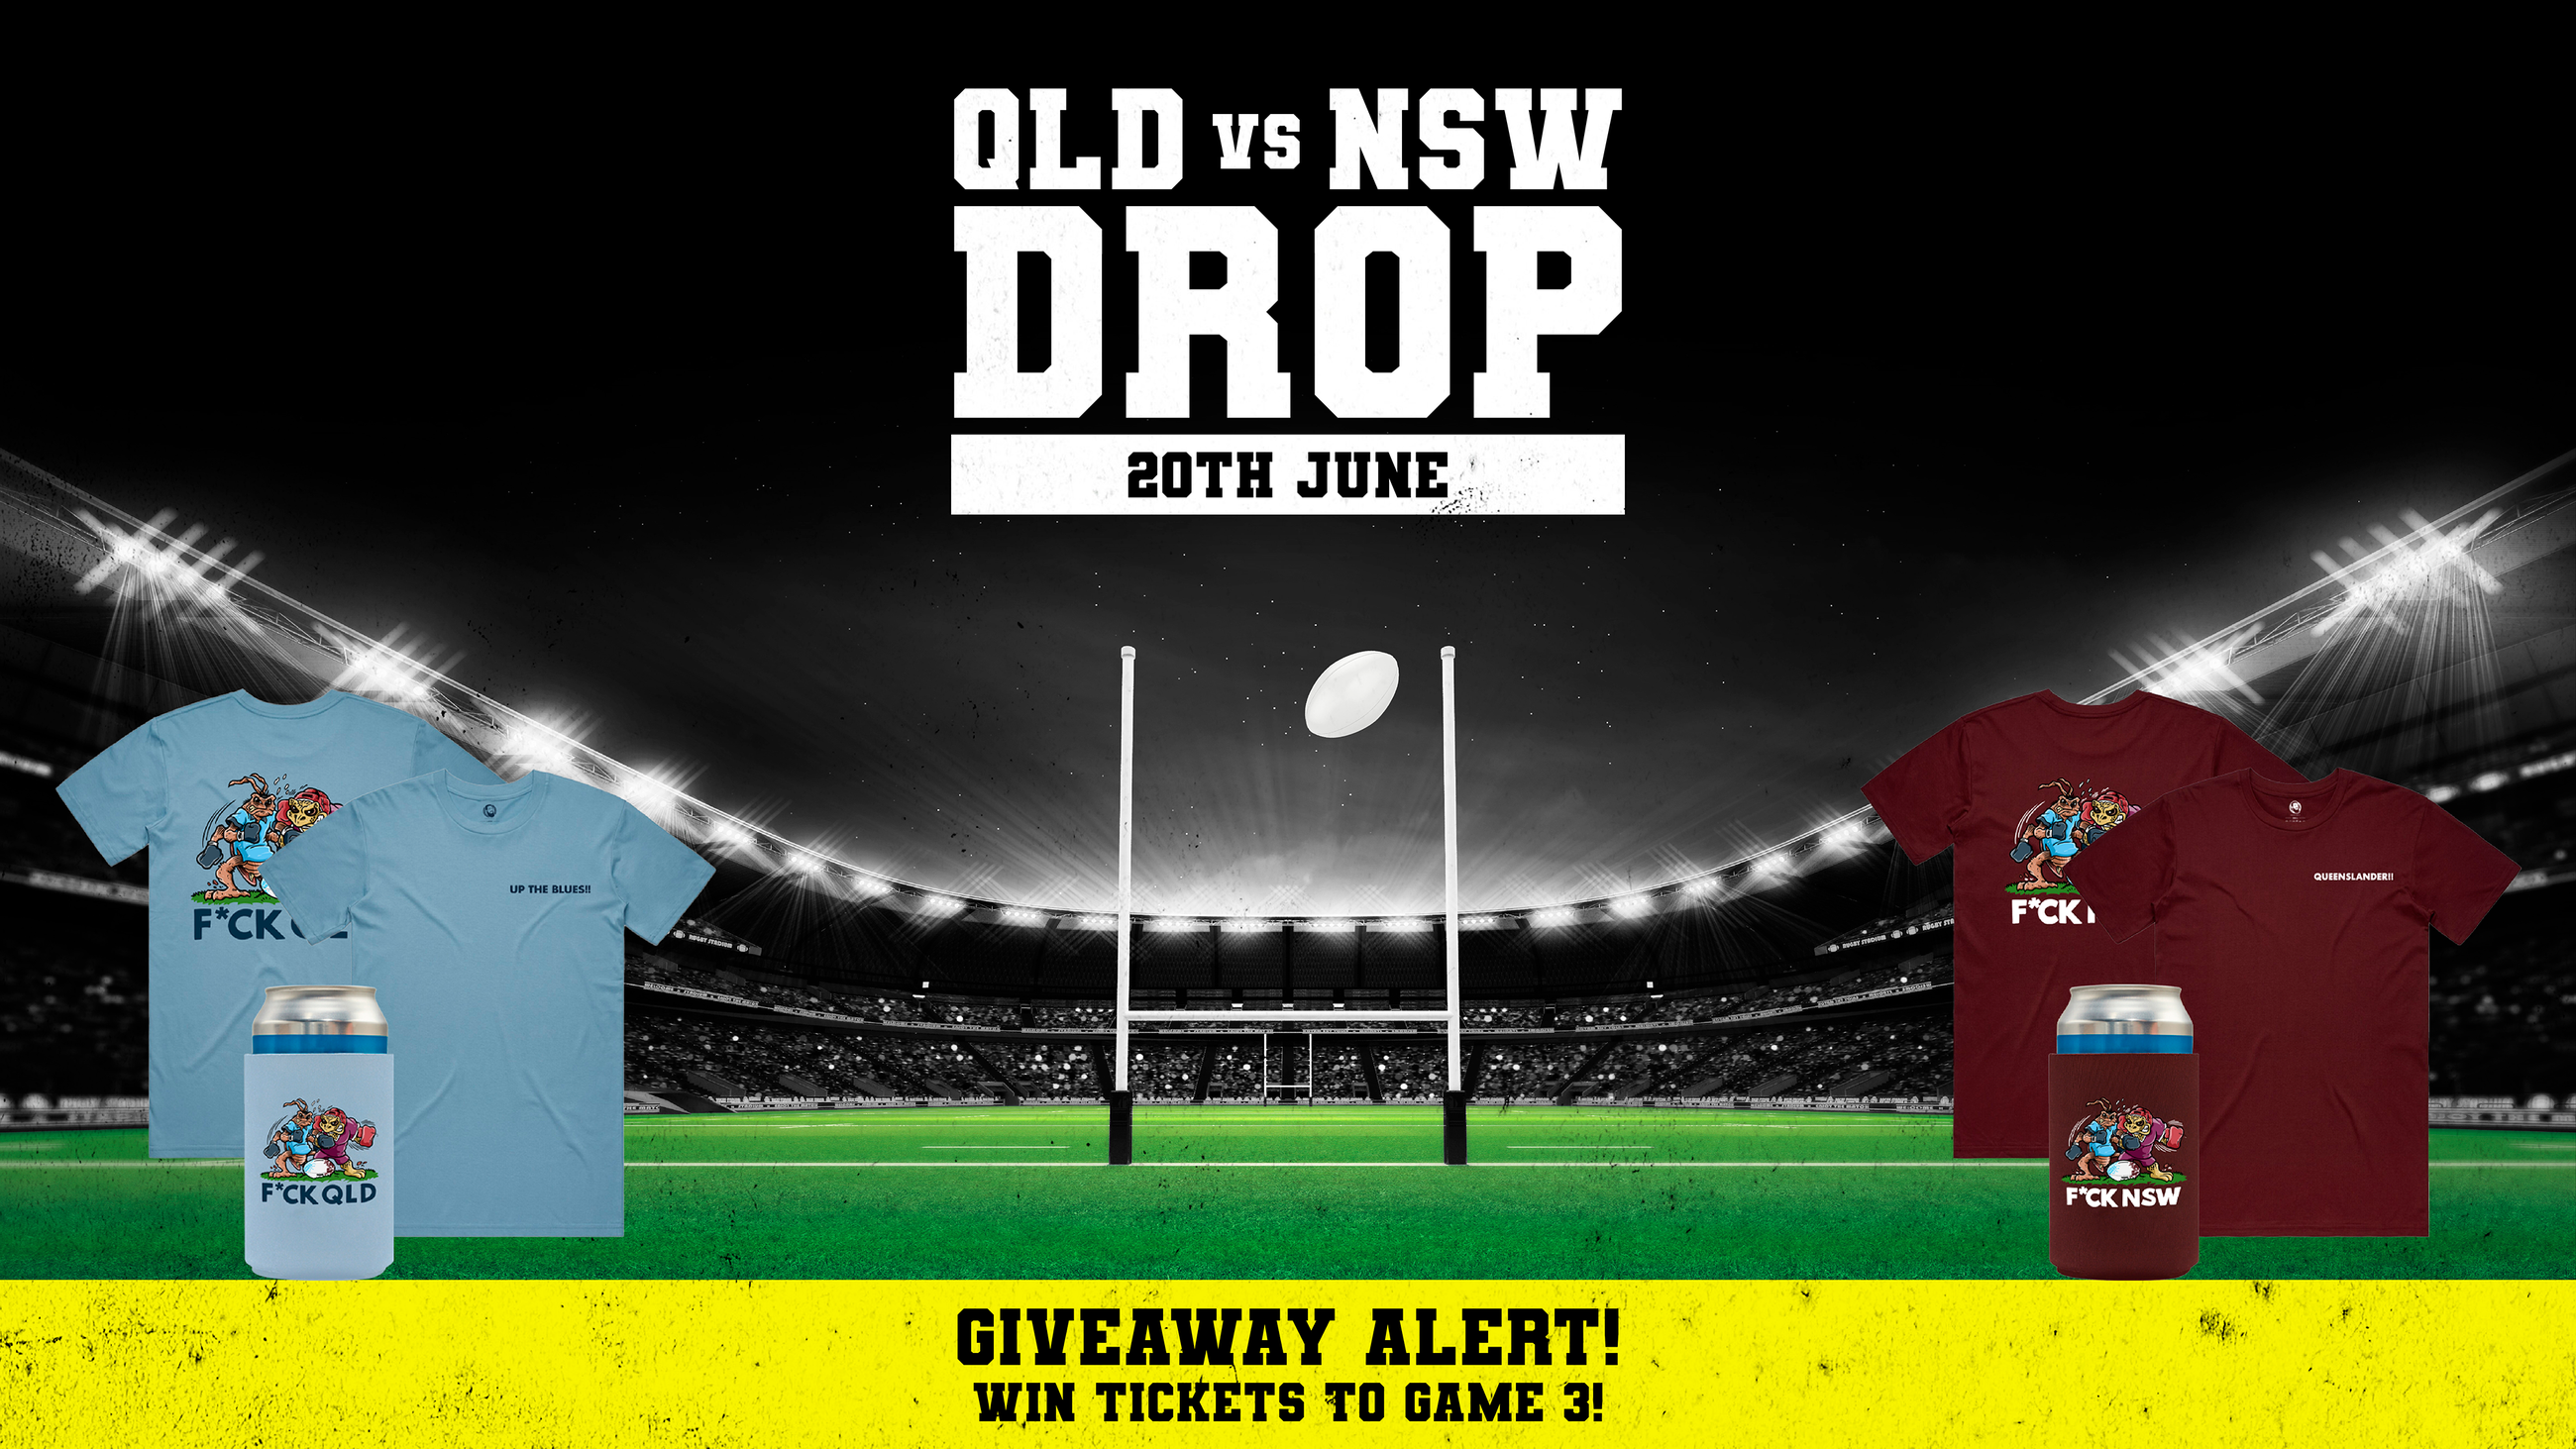 Introducing the QLD VS NSW Drop! This limited edition drop includes the F*CK QLD Bundle & F*CK NSW Bundle. Let your mates know which side you're on!